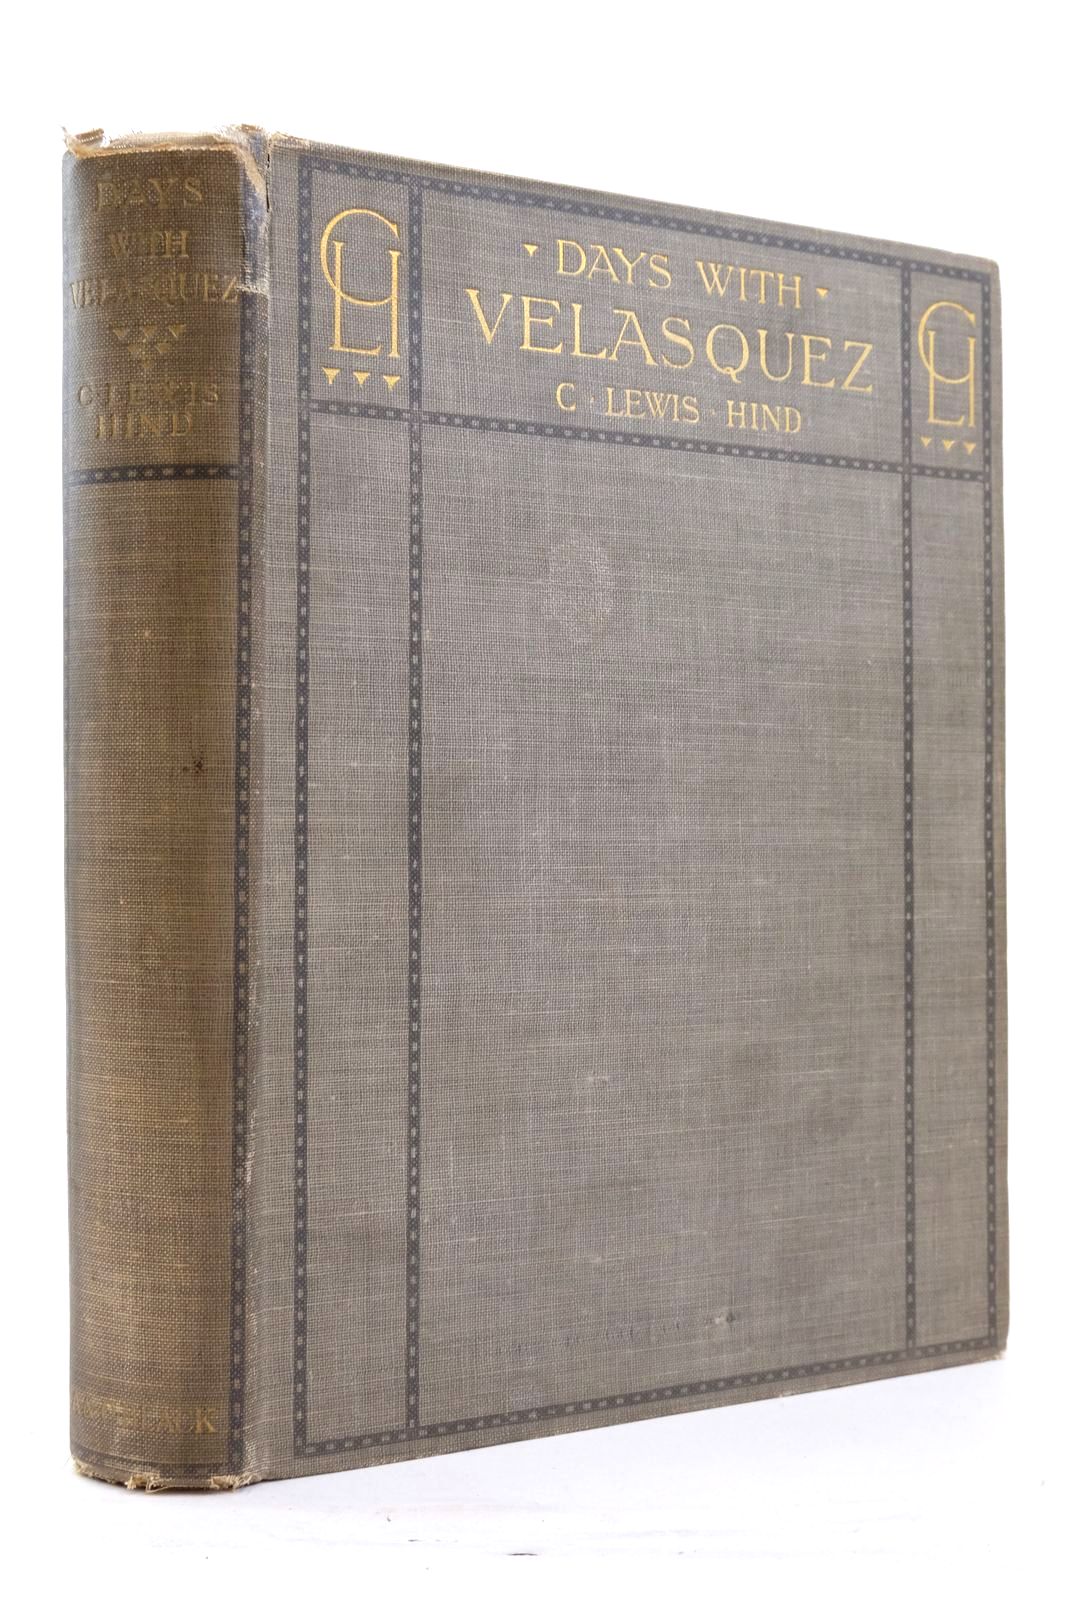 Photo of DAYS WITH VELASQUEZ written by Hind, C. Lewis illustrated by Velasquez, Diego published by Adam &amp; Charles Black (STOCK CODE: 2137354)  for sale by Stella & Rose's Books